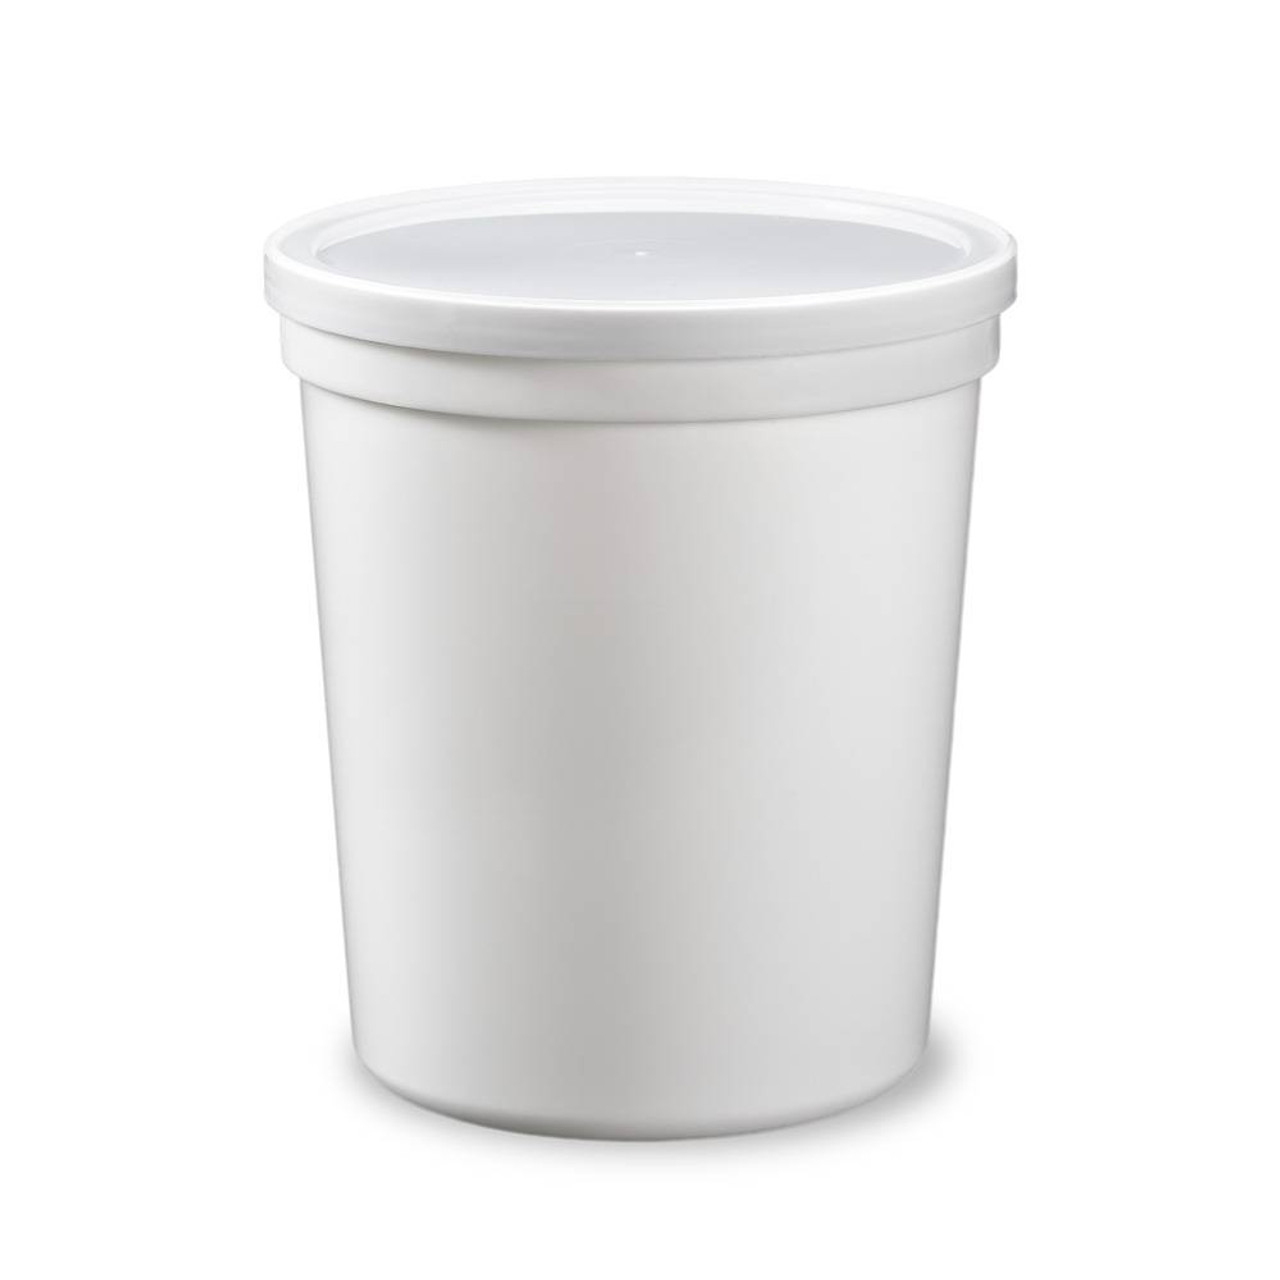 1/4 Gallon (32 oz.) BPA Free Food Grade Tall Round Container